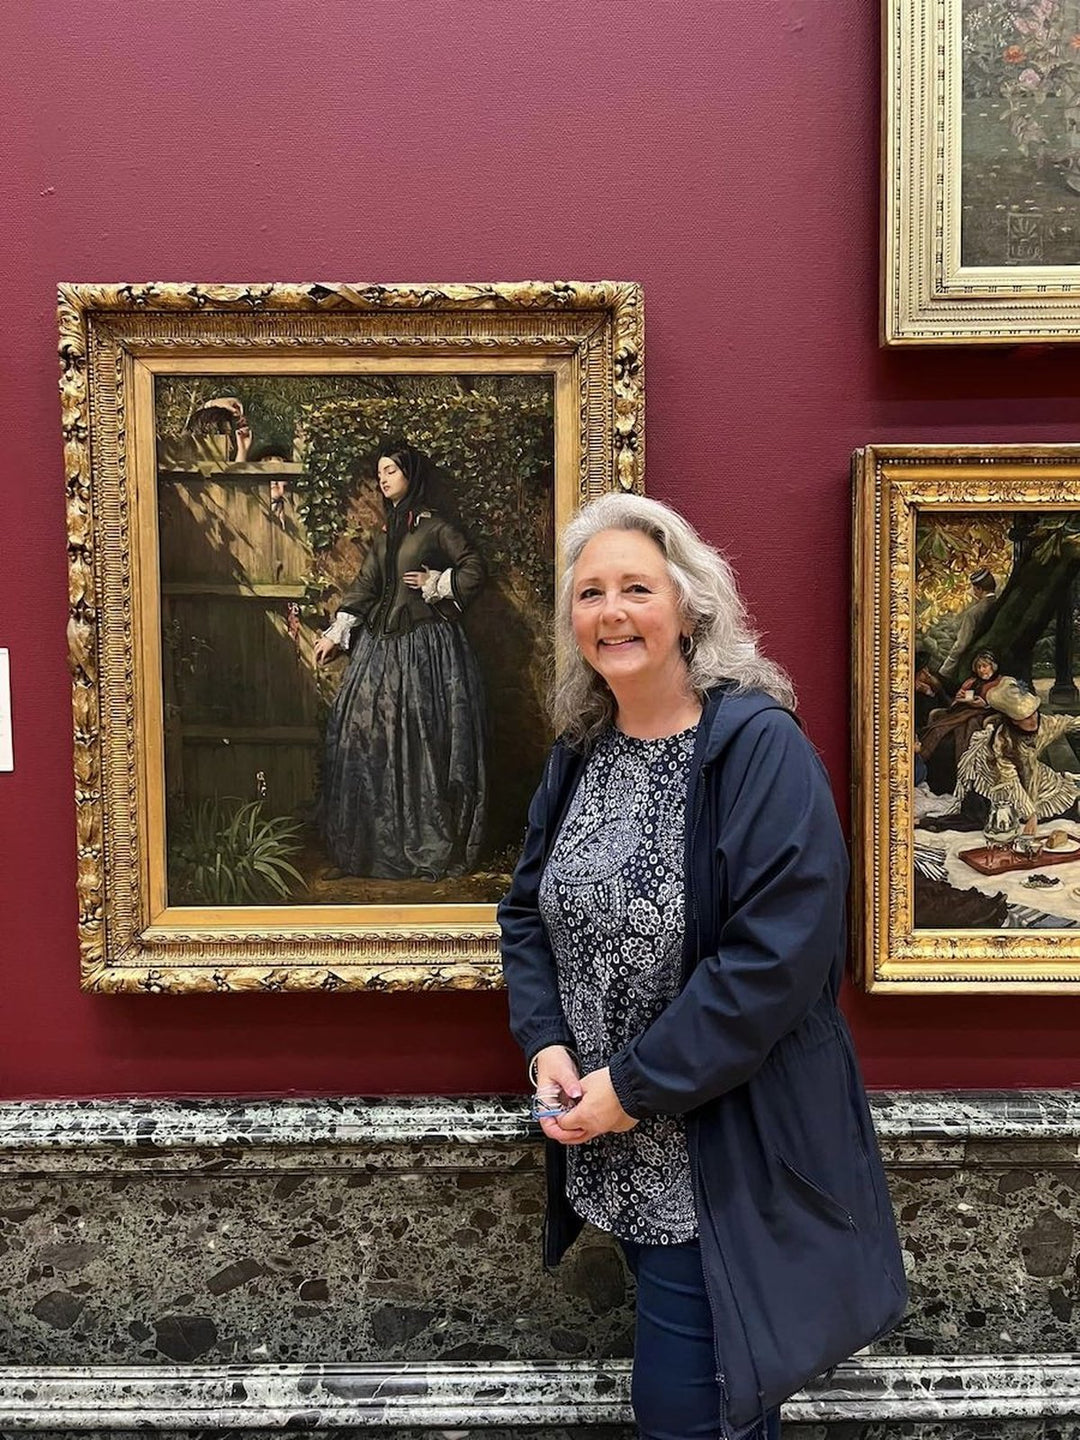 A nice surprise during a recent visit to Tate Britain!